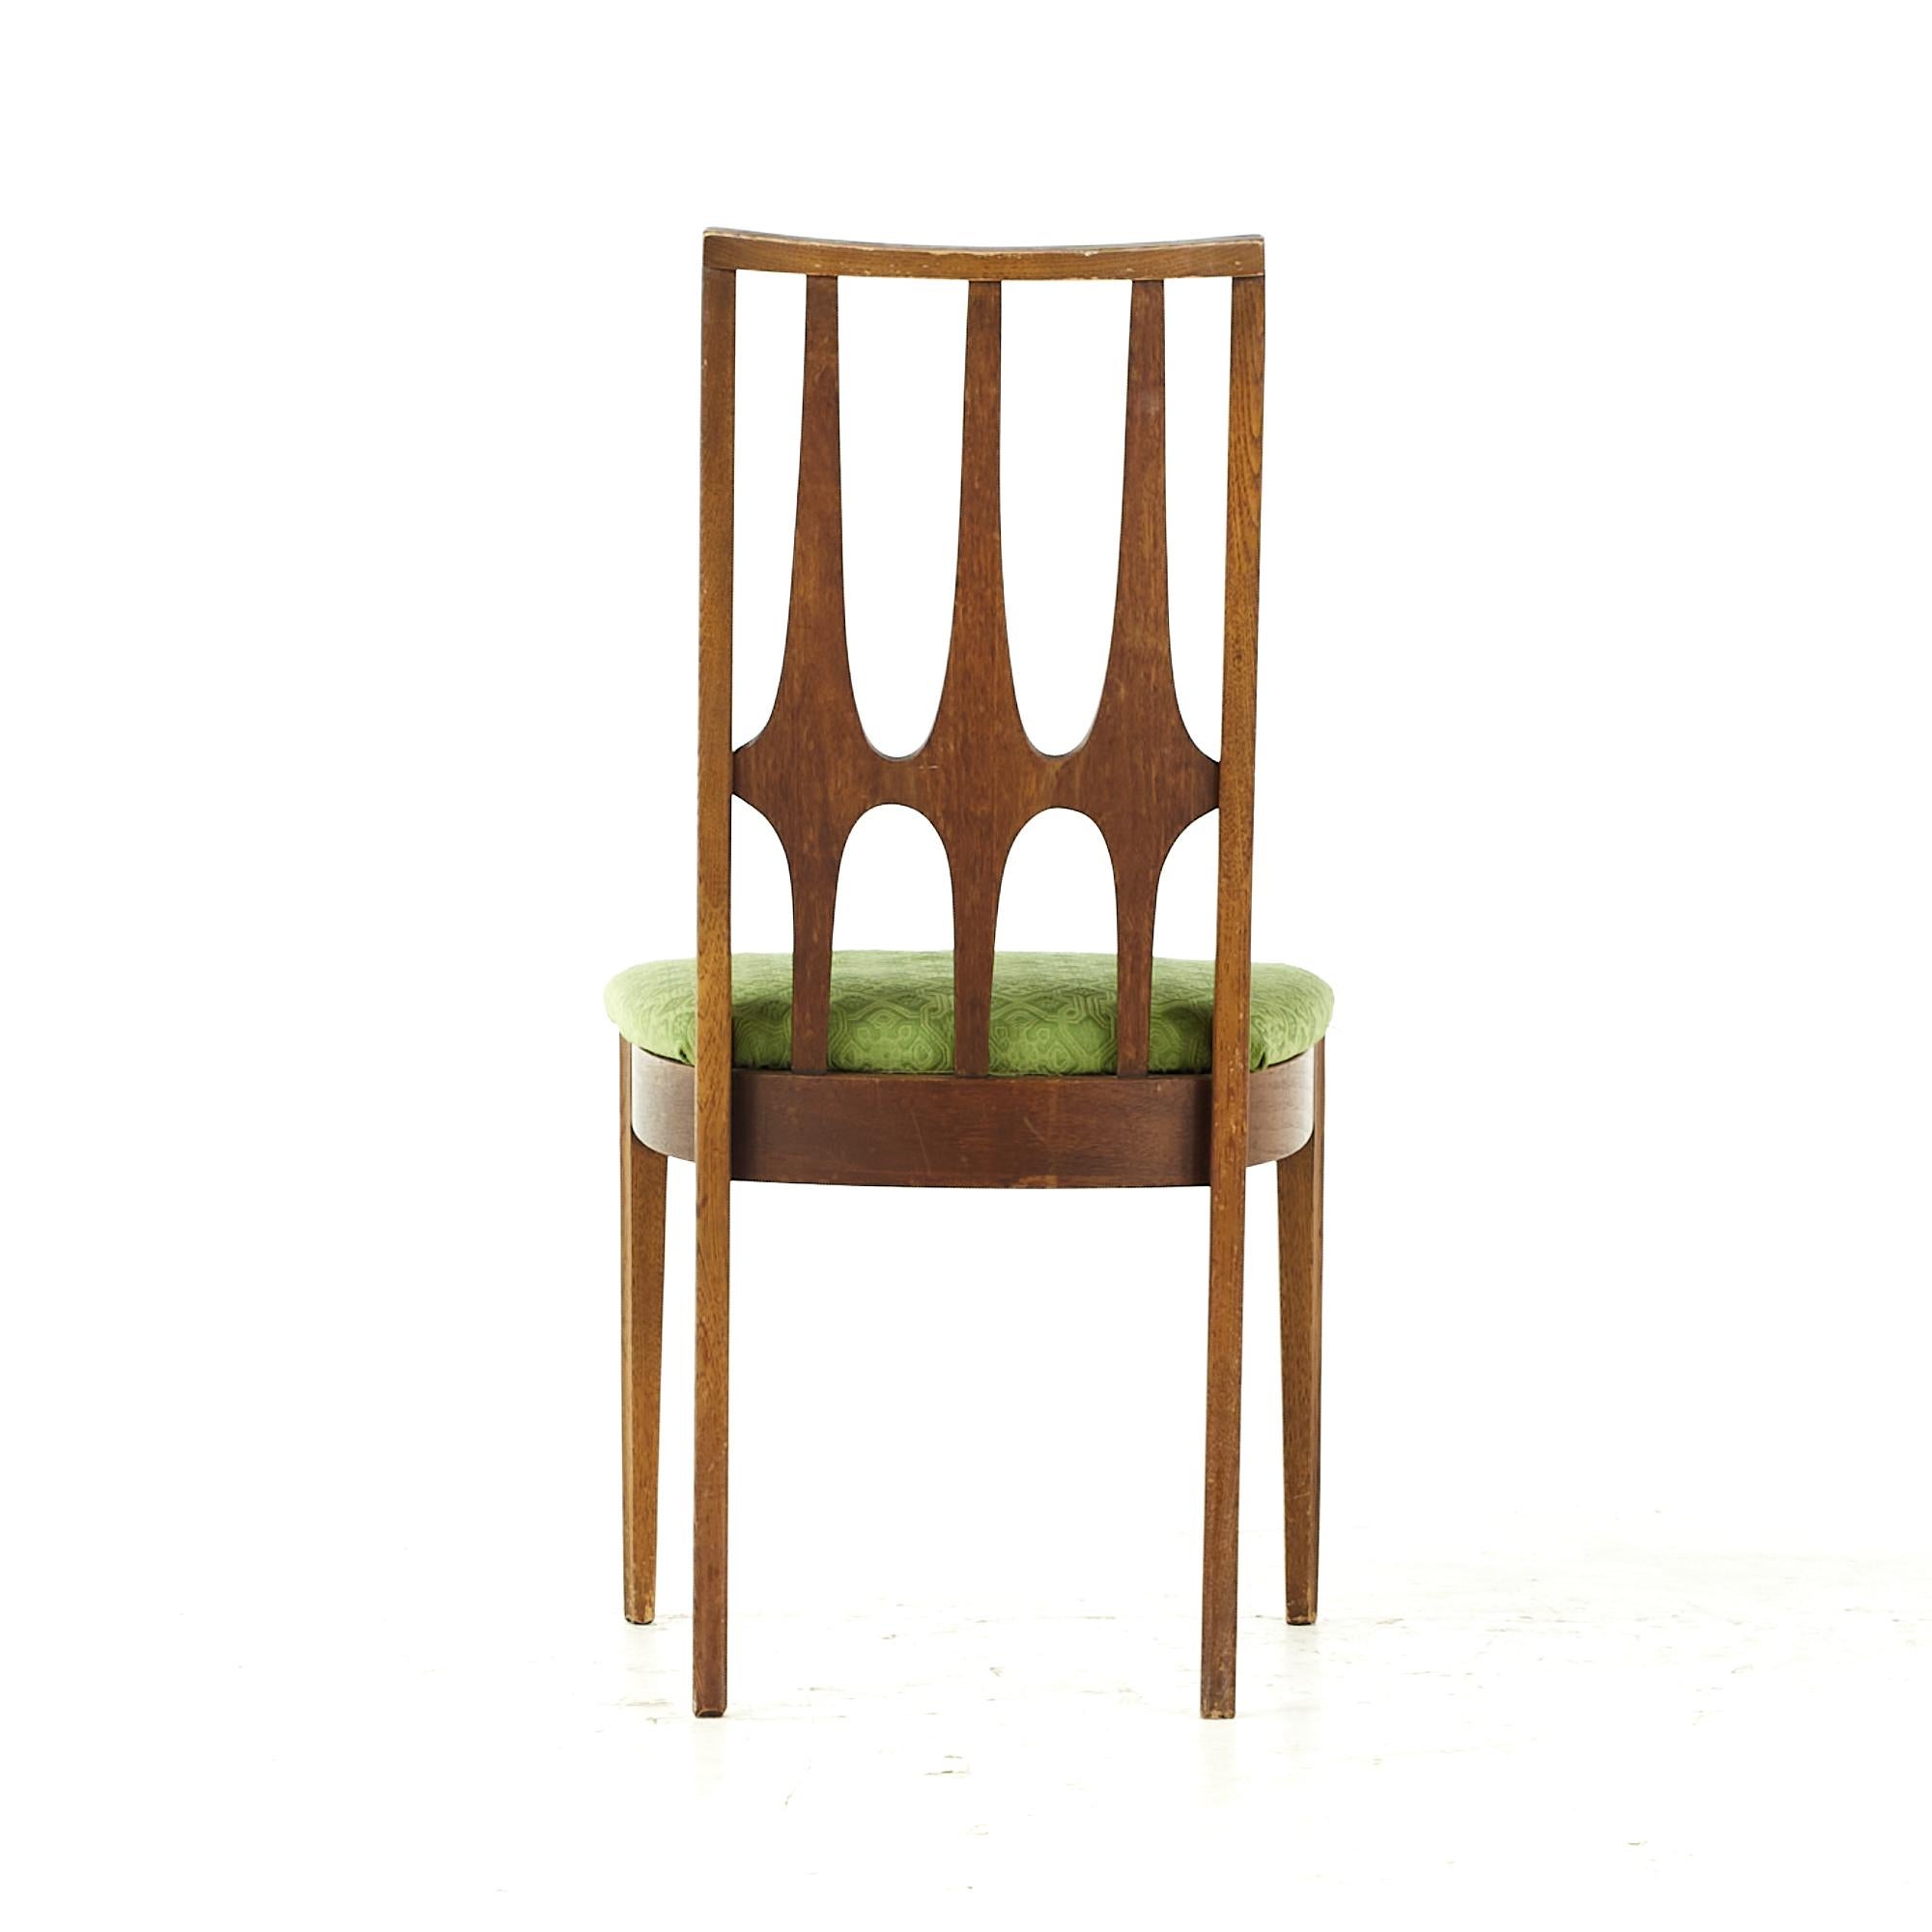 Broyhill Brasilia Midcentury Dining Chairs with 1 Captain, Set of 5 In Good Condition For Sale In Countryside, IL